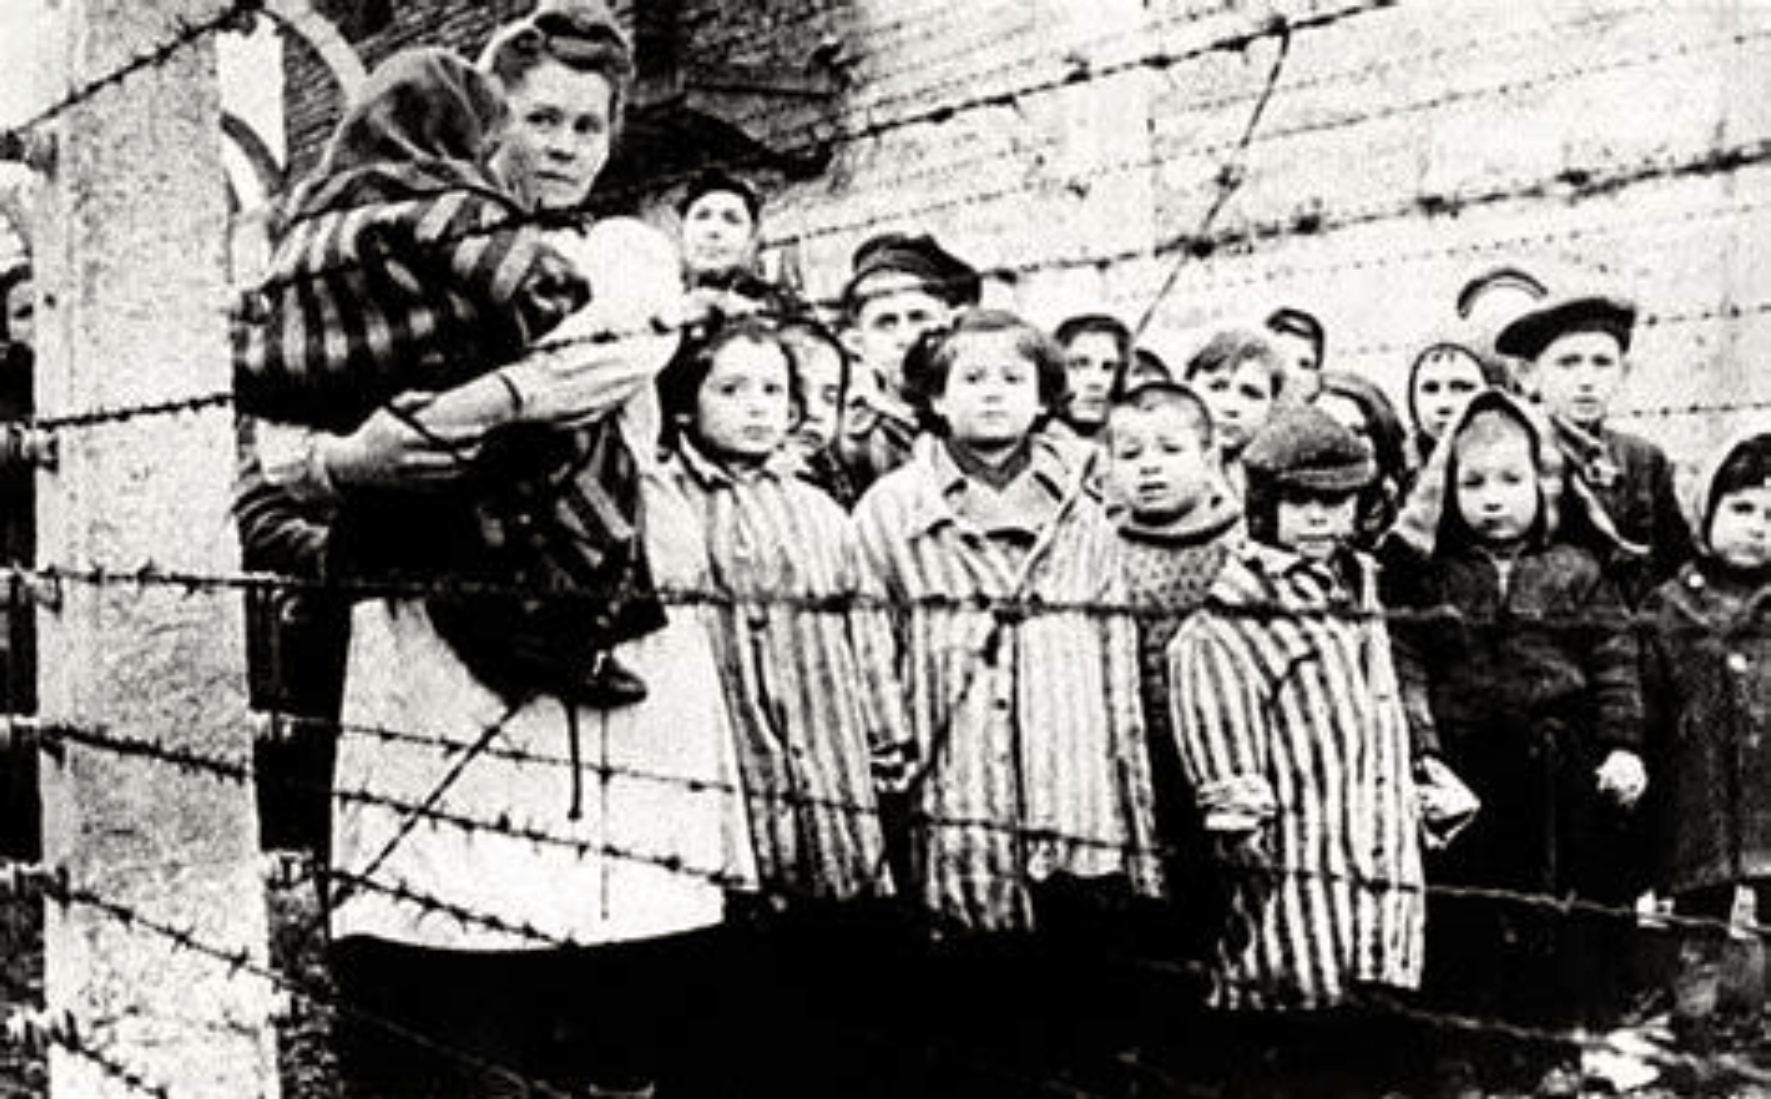 The unpunished crimes of the Holocaust